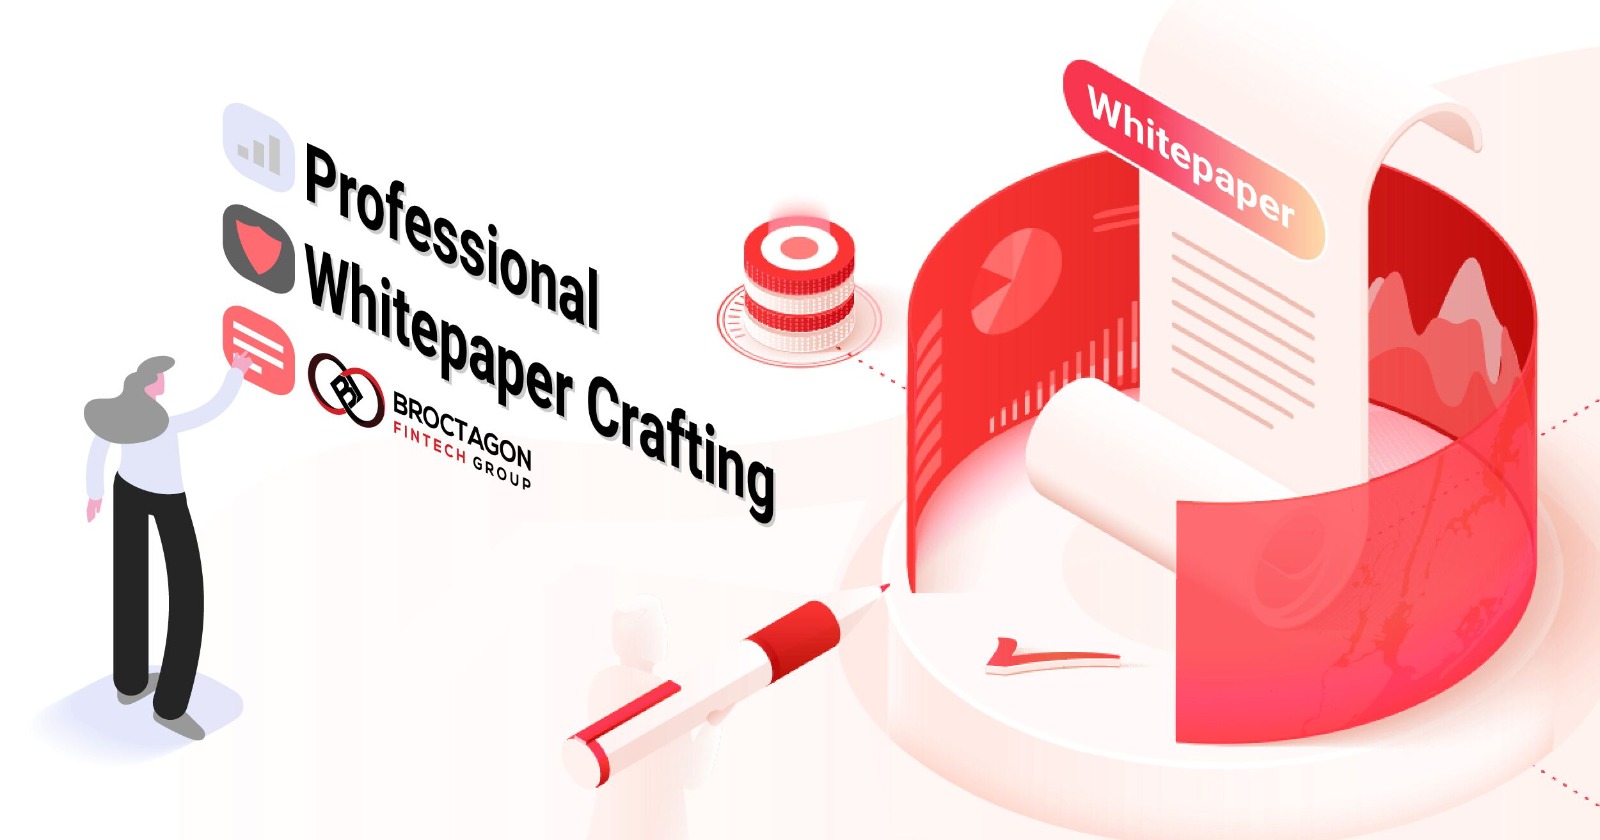 Professional Whitepaper Writing Services